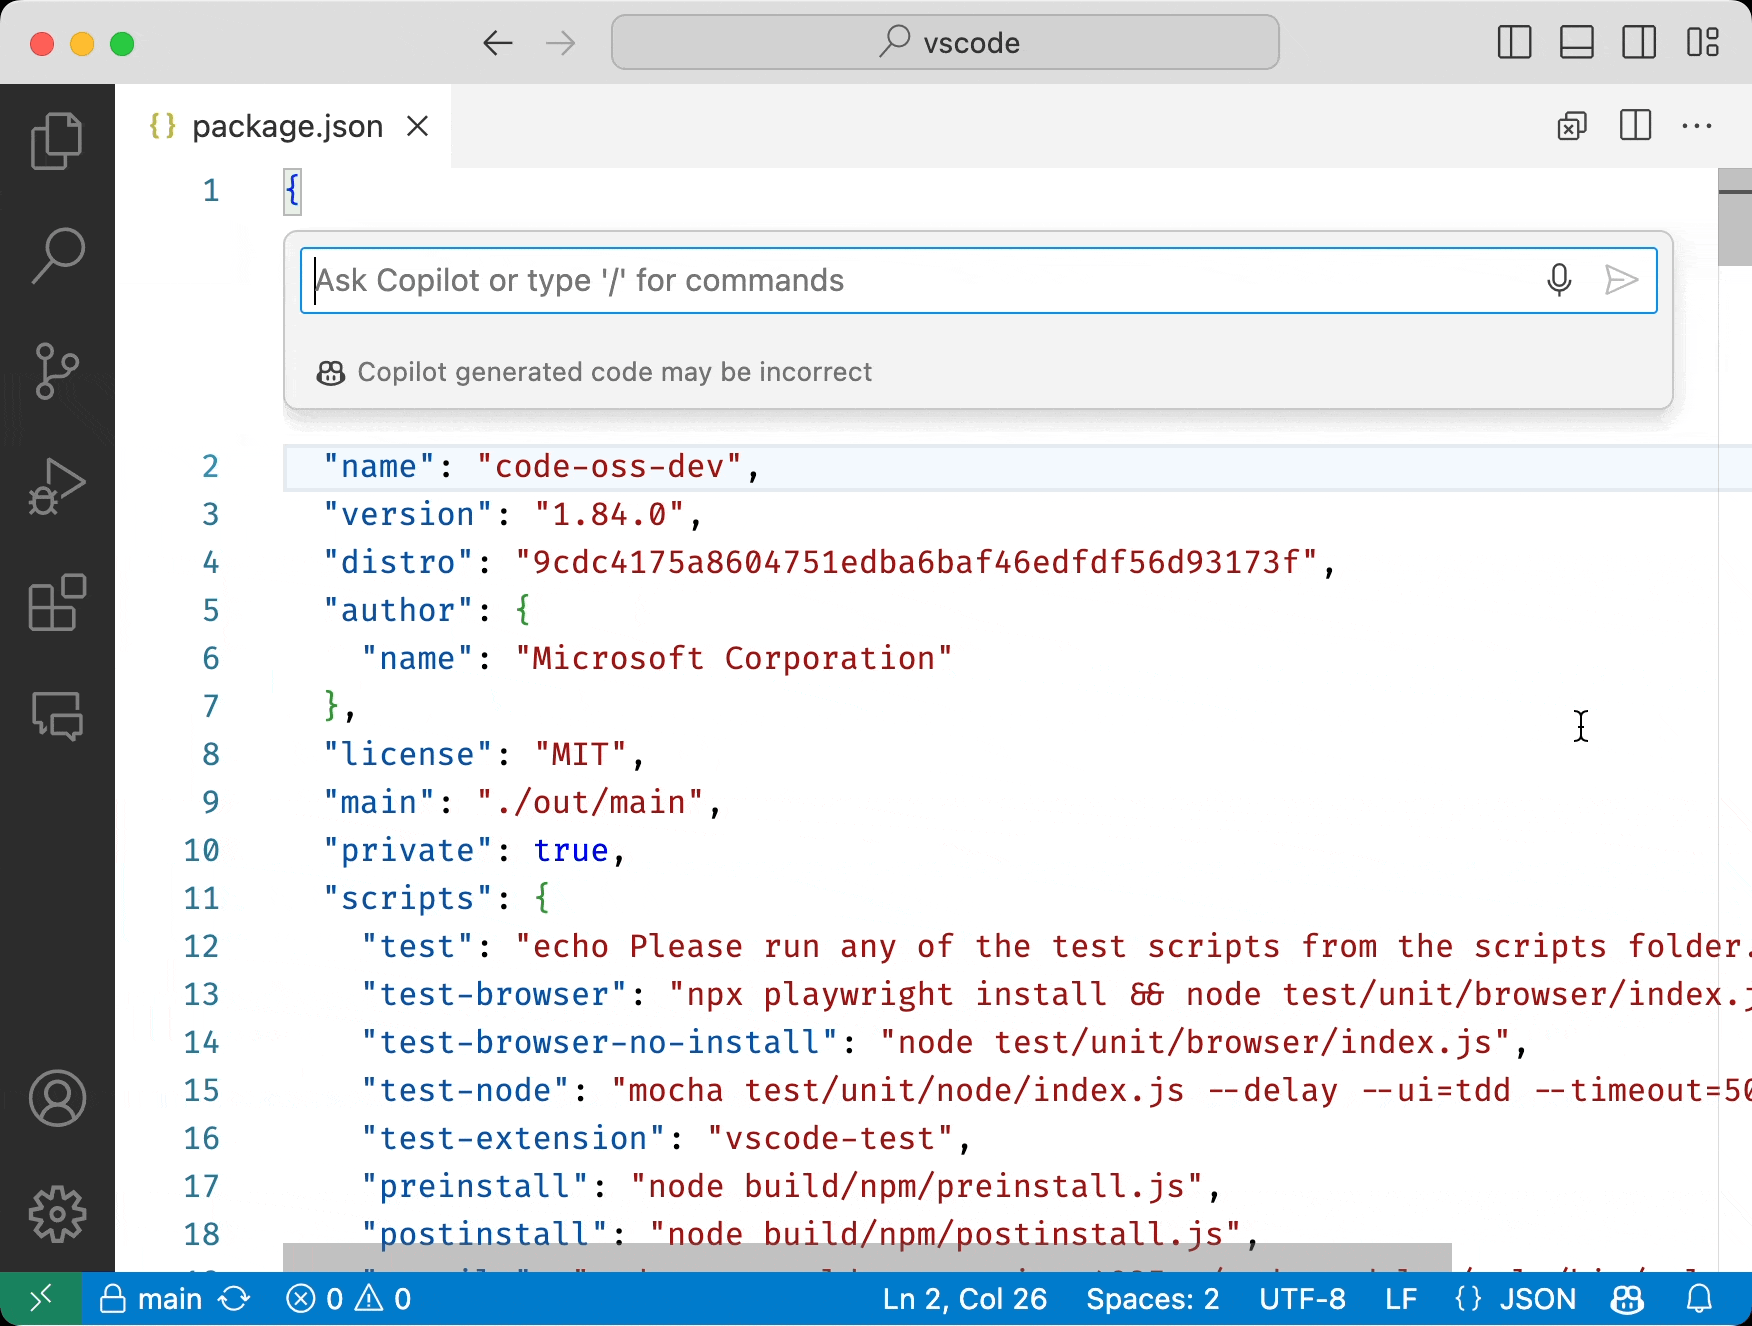 VS Code Speech activated by the microphone icon